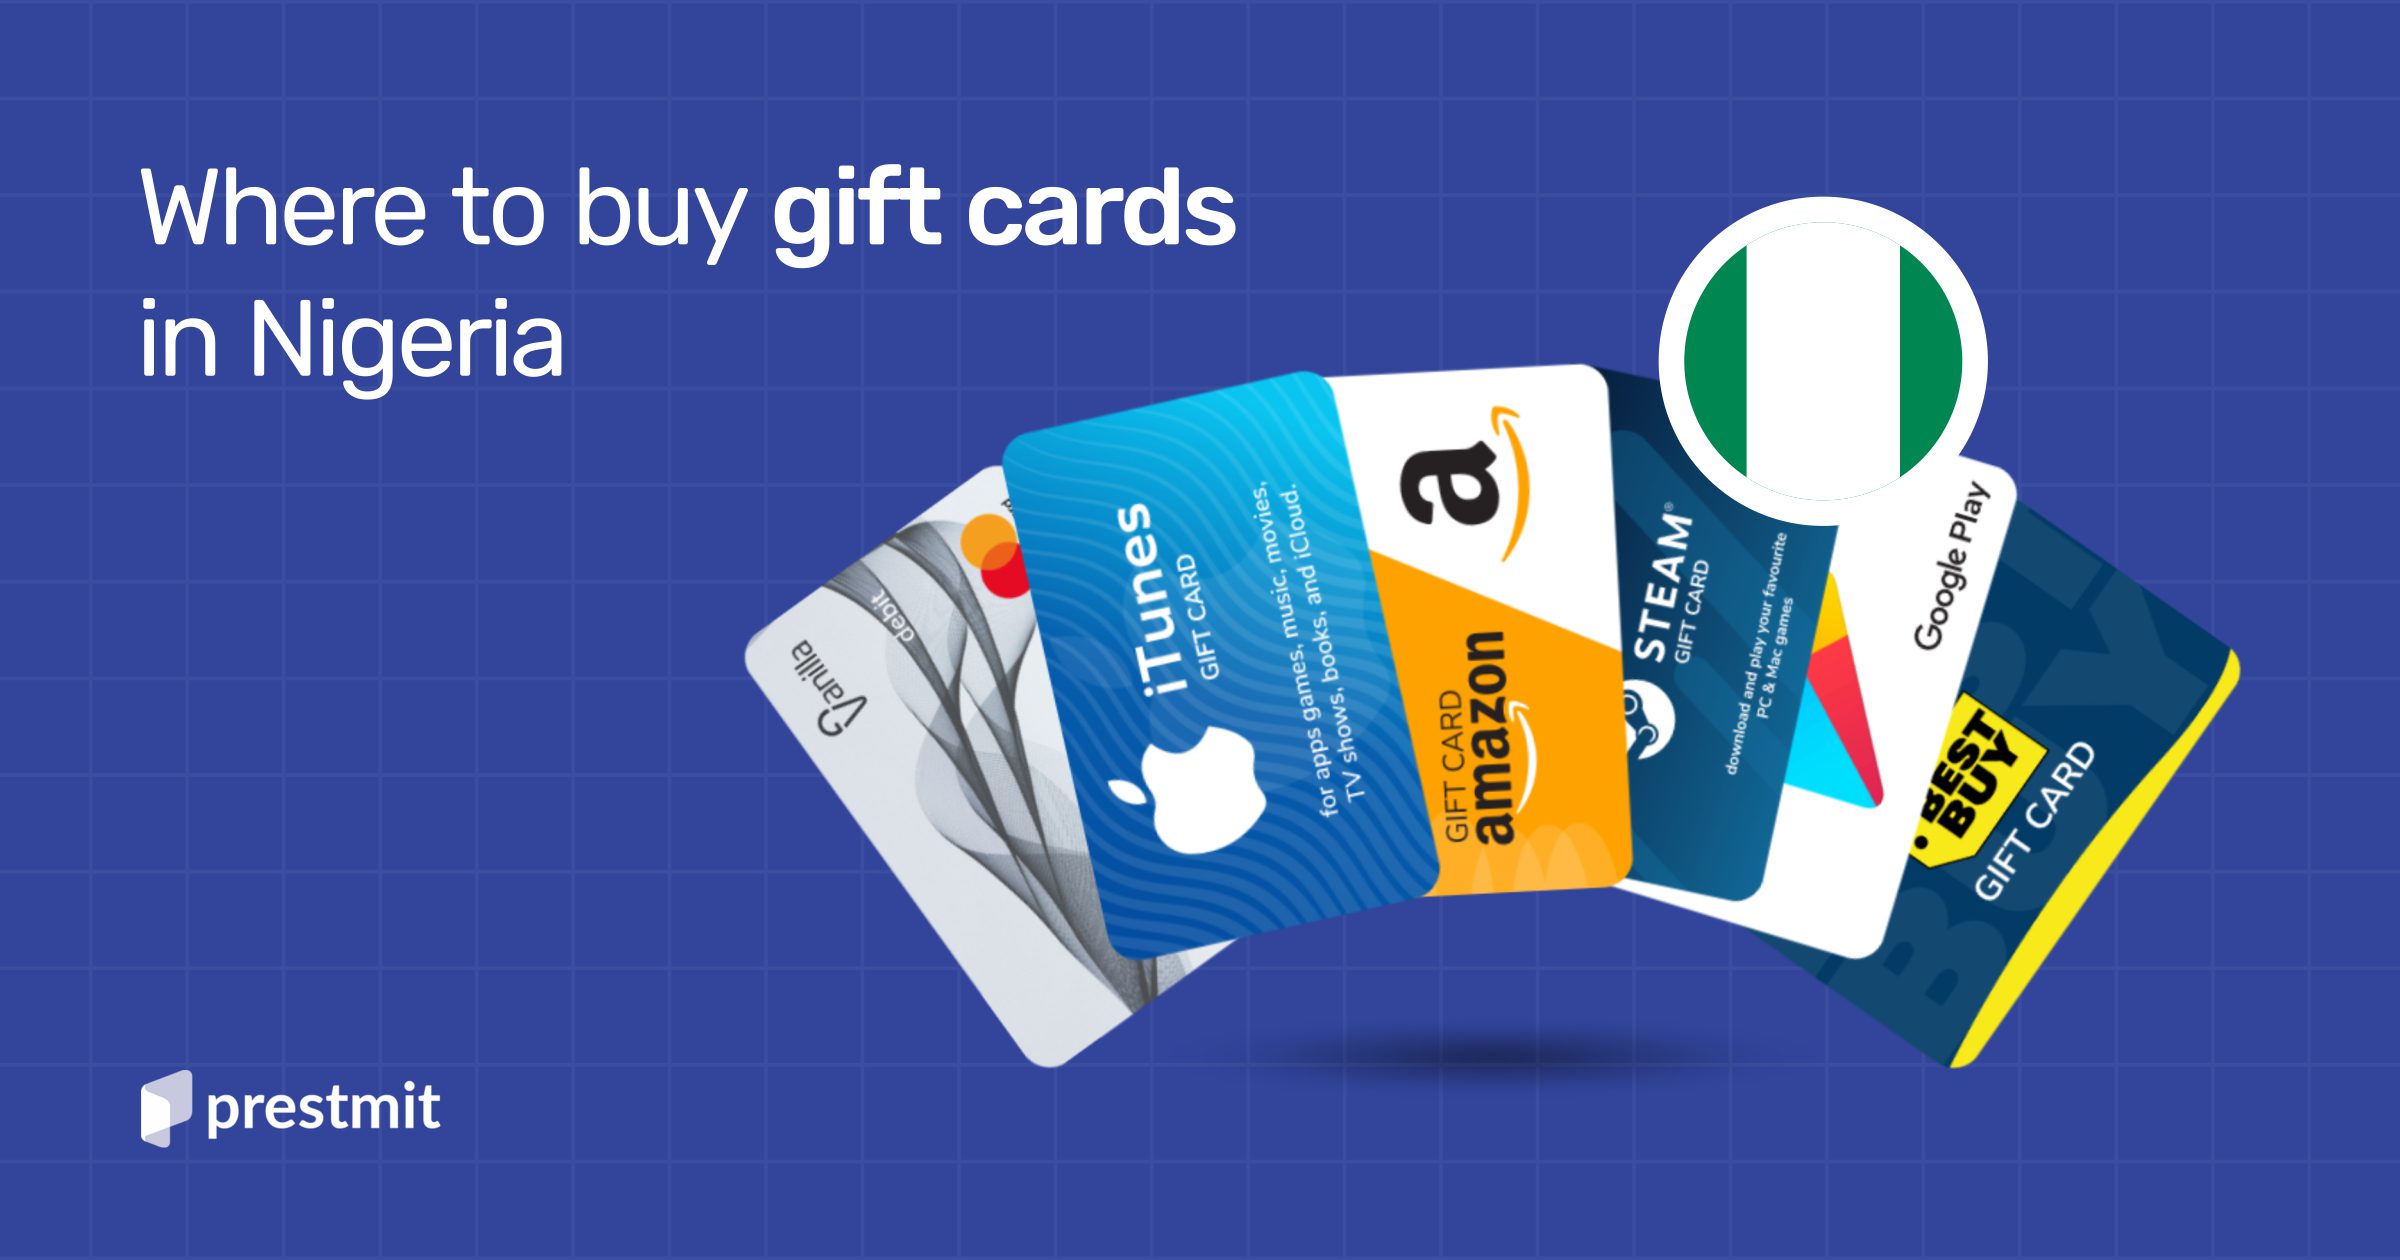 buy Spotify gift card online, fastest & secured